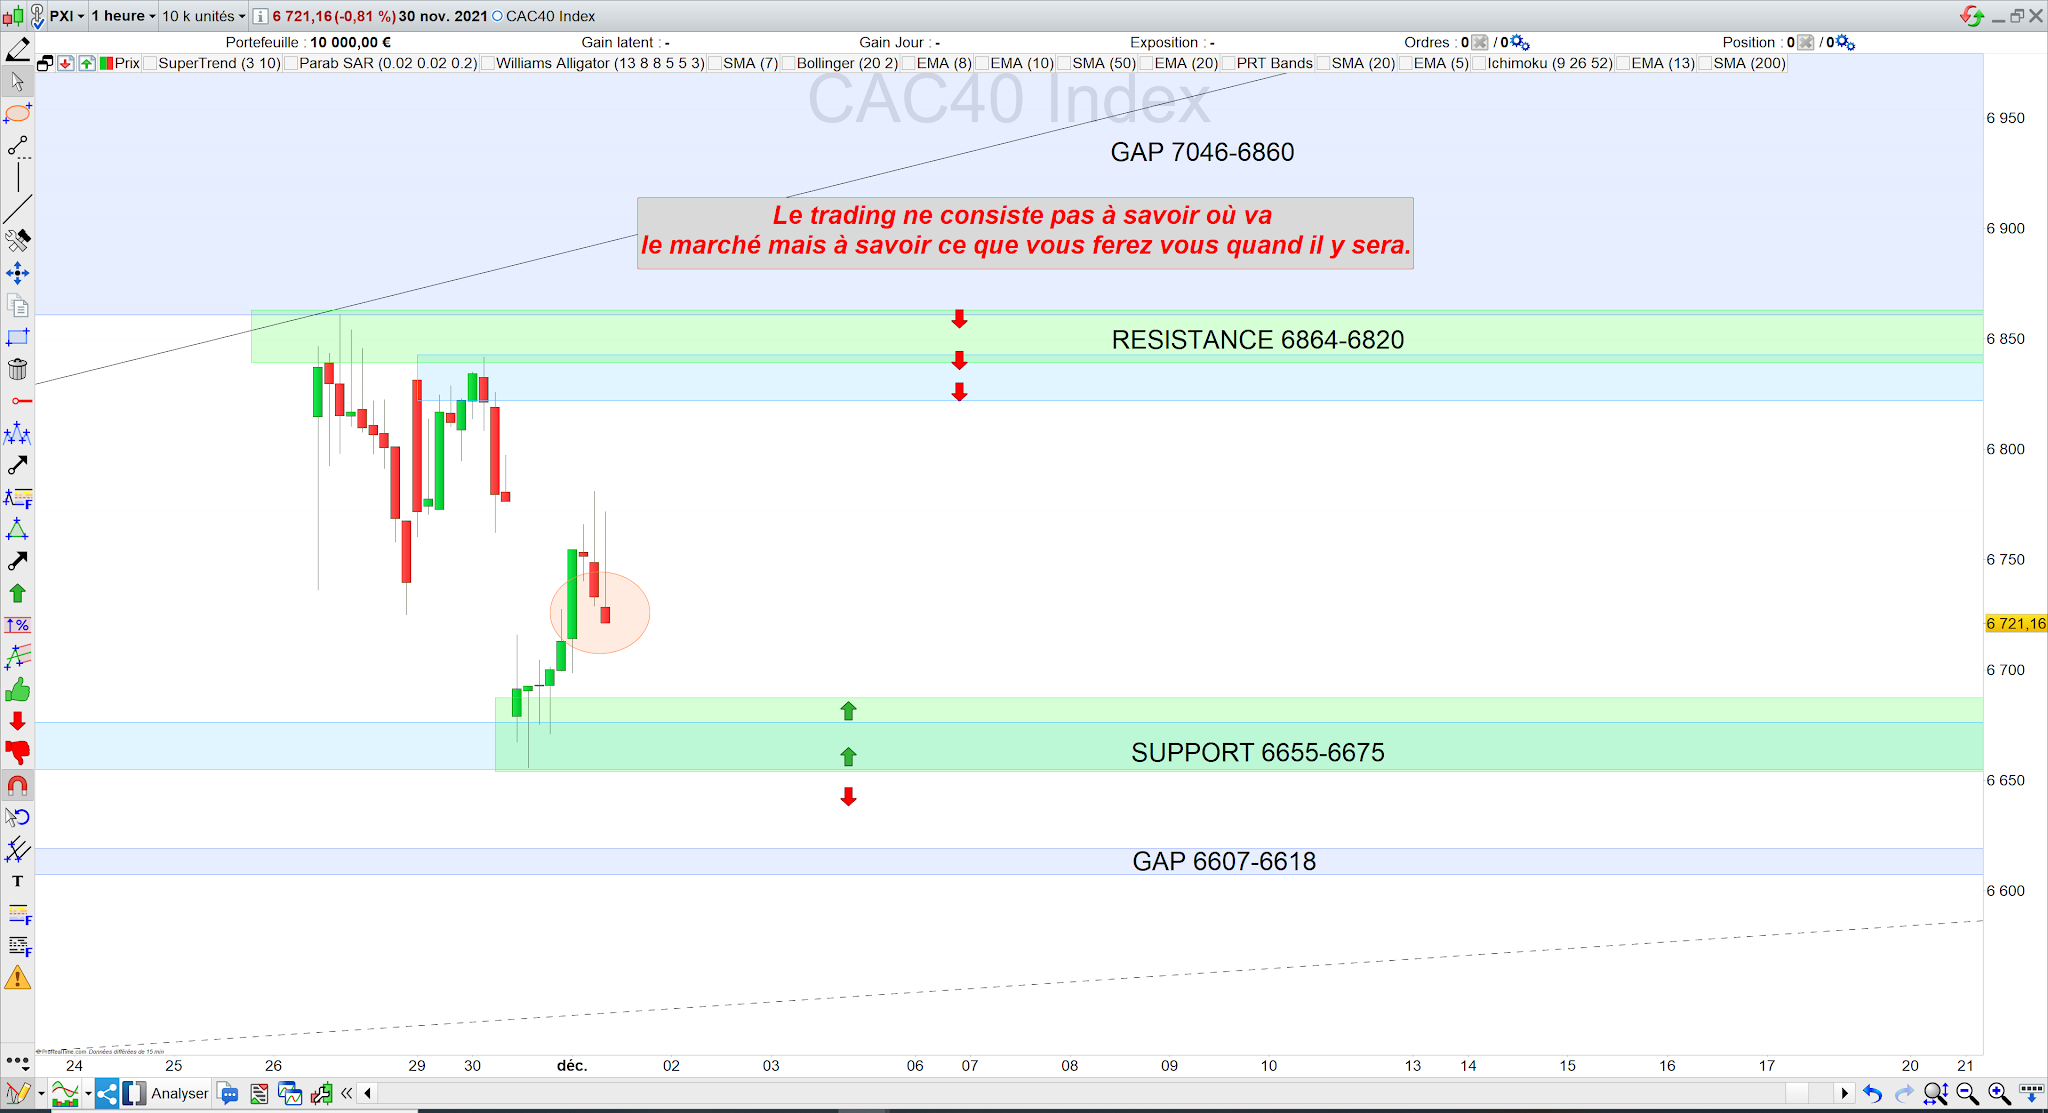 Trading cac40 01/12/21